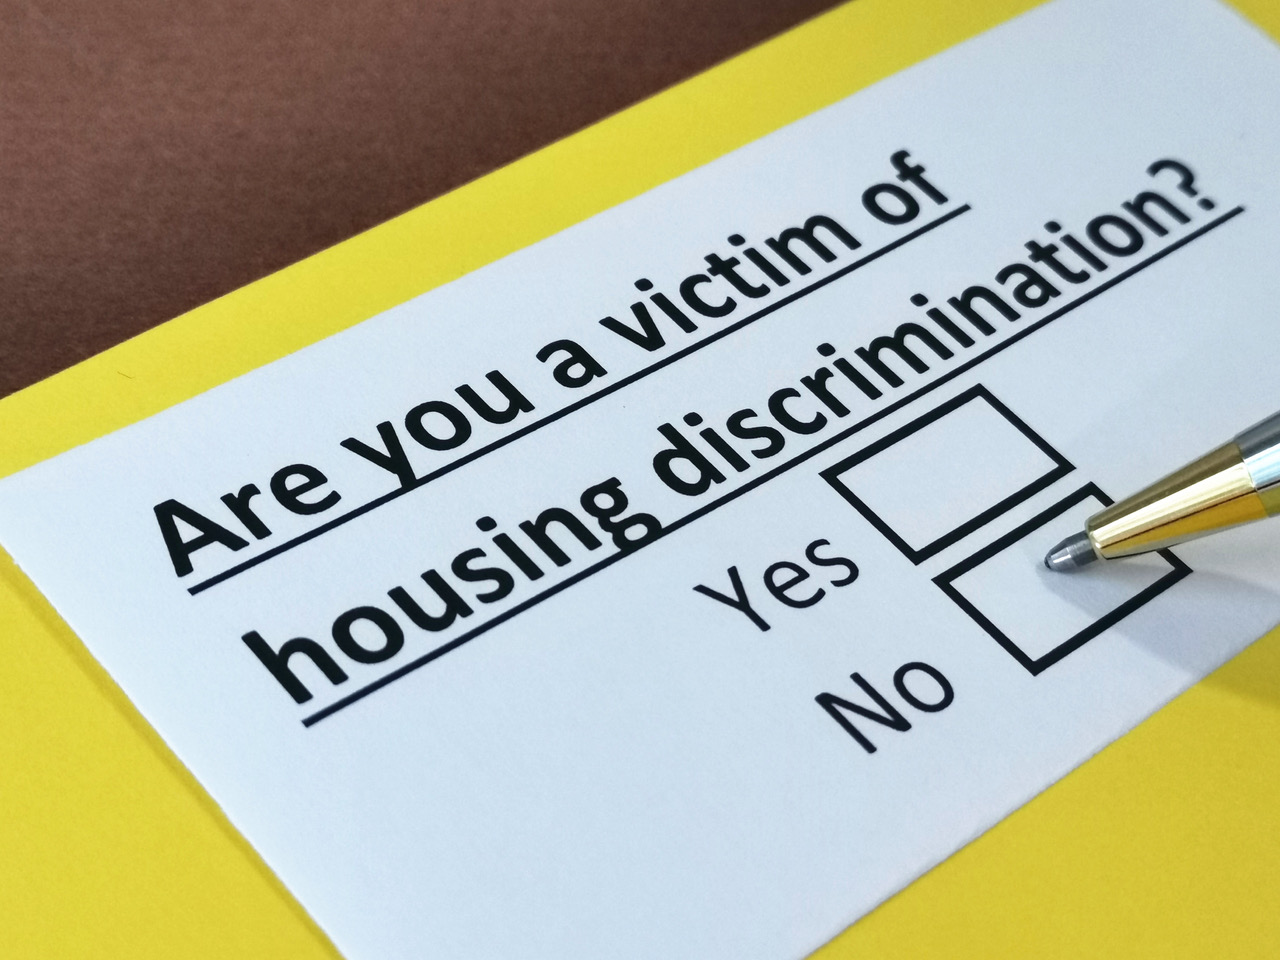 New Legal Standards: California Takes Steps to Crack Down on Housing Discrimination